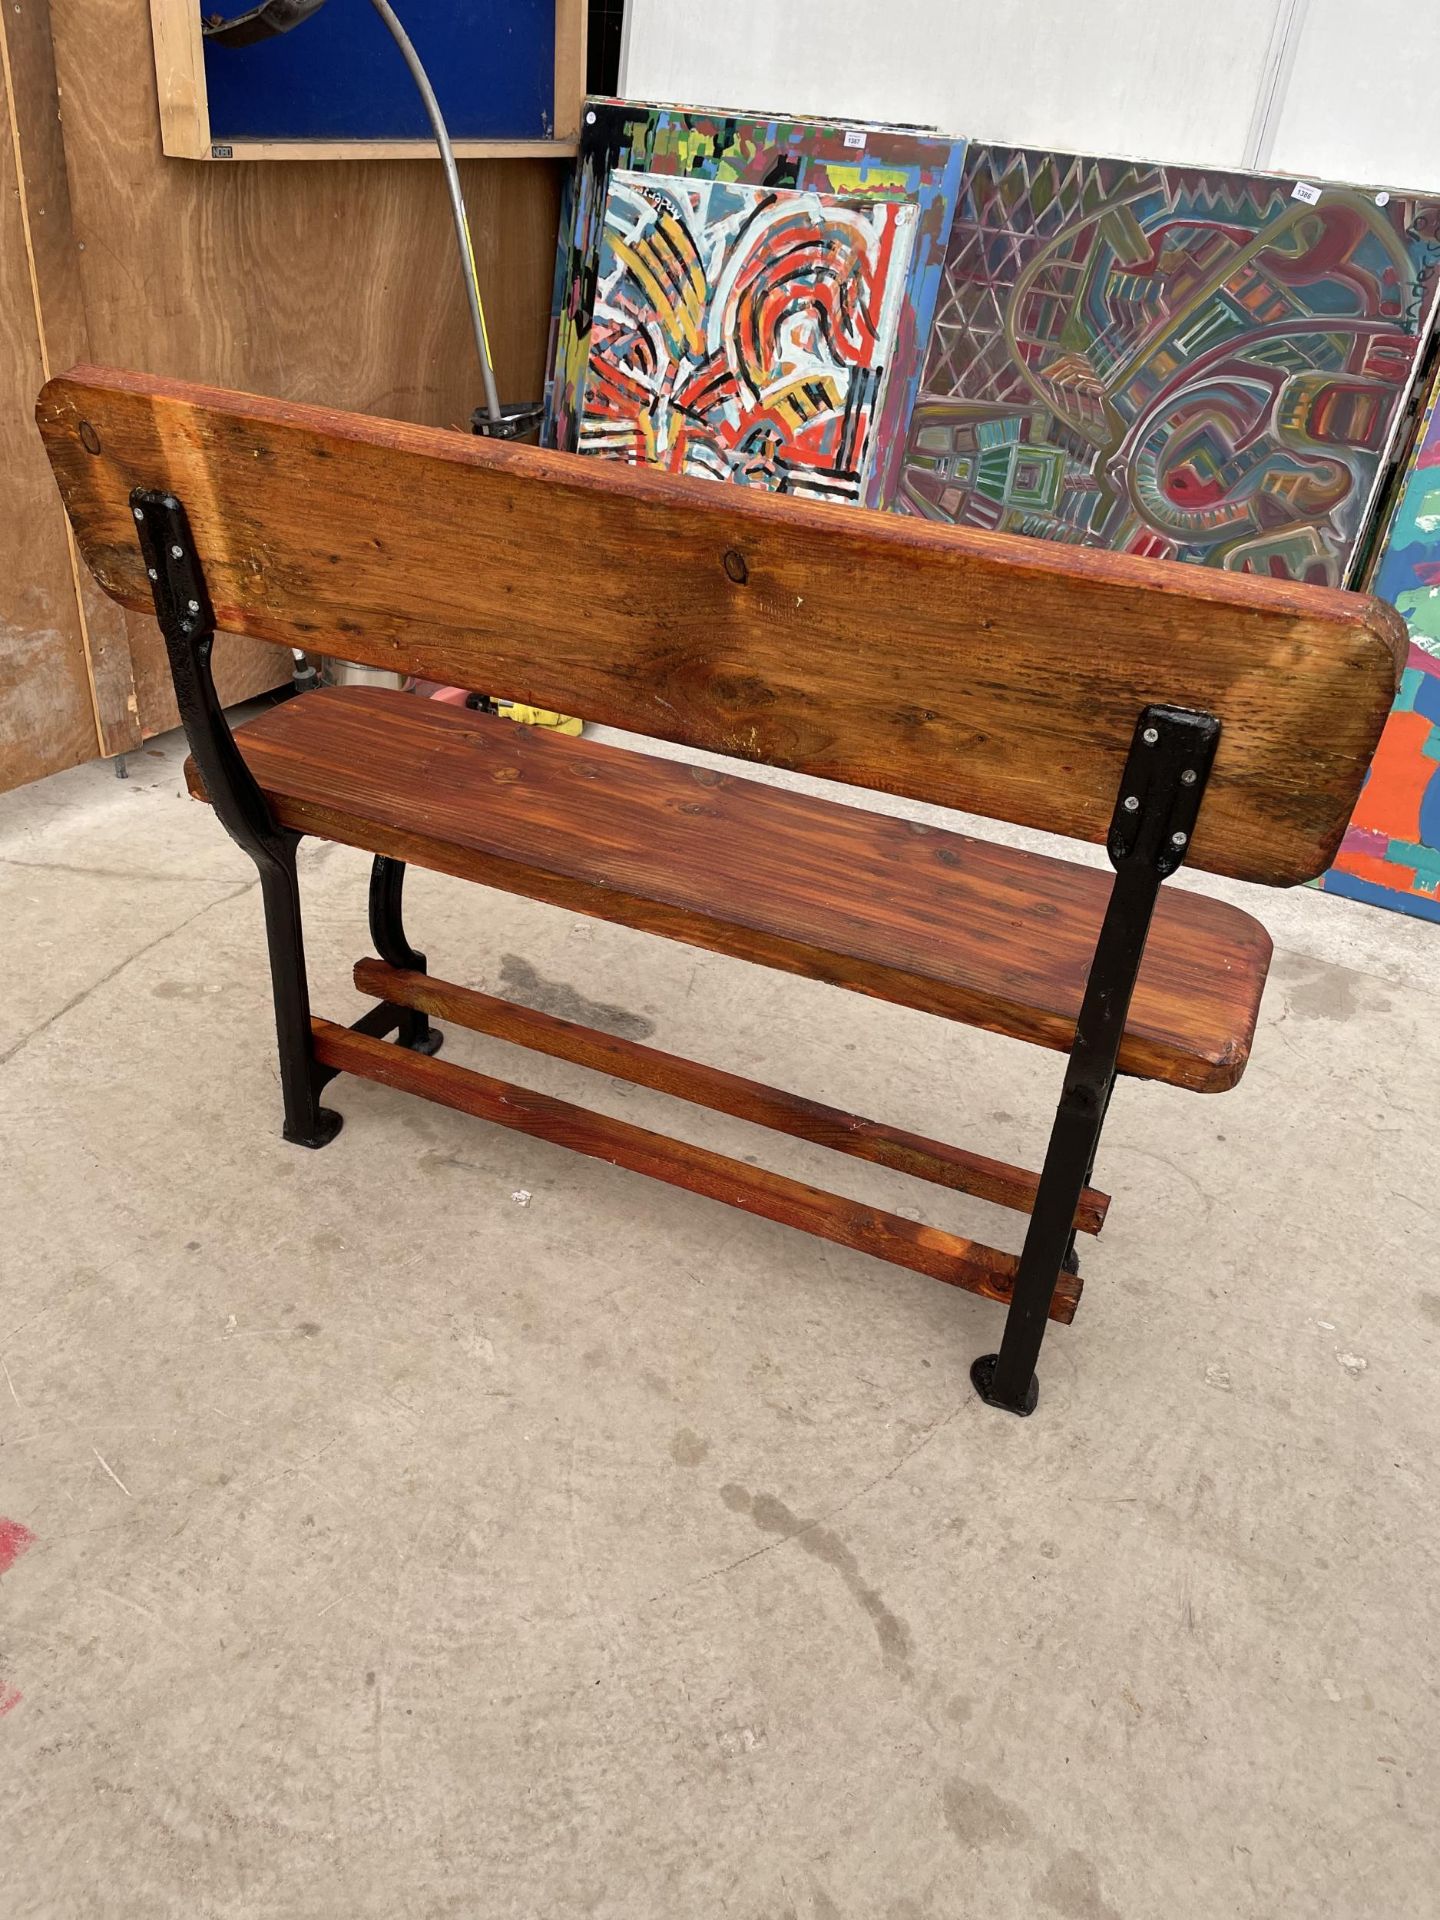 A VINTAGE WOODEN TRAM BENCH WITH CAST ENDS (L:105CM) - Image 5 of 6